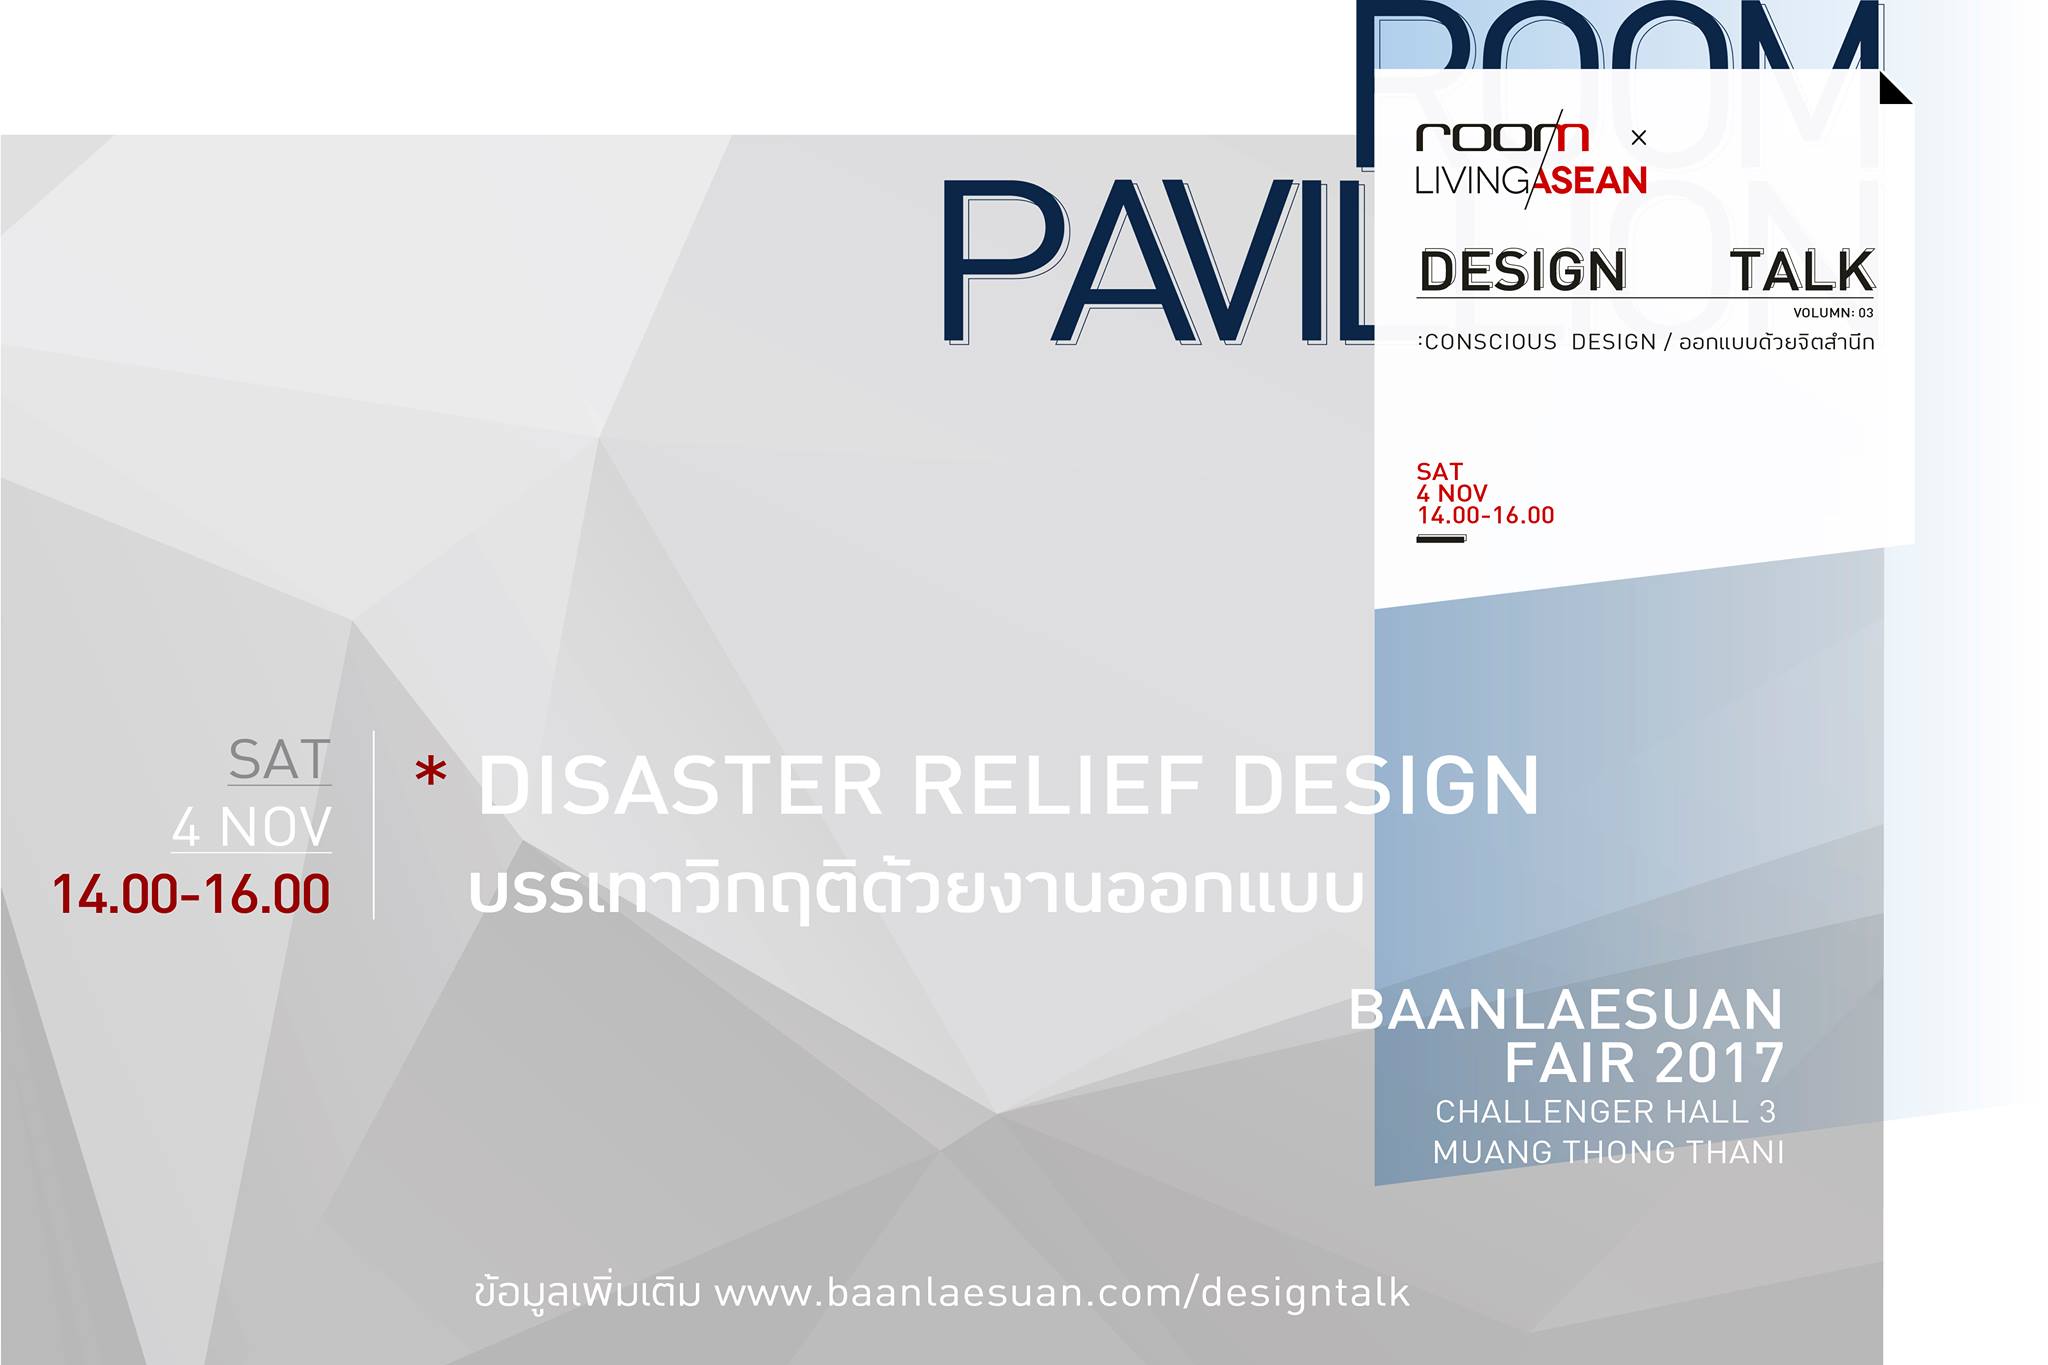 Design for Disasters